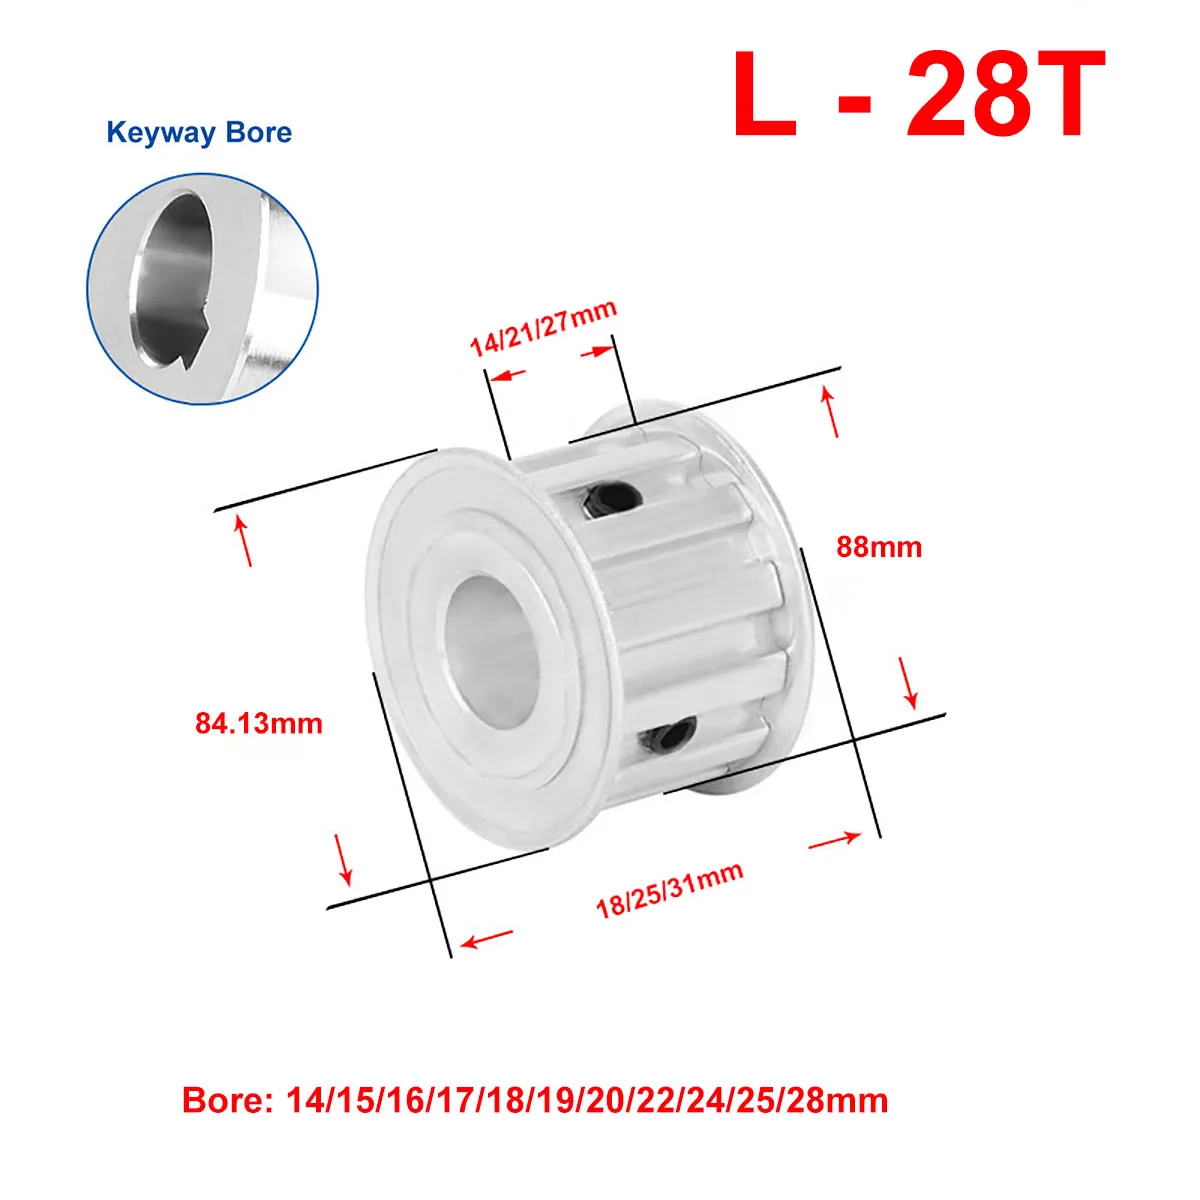 

1Pcs Timing Pulley L-28T Keyway Bore 14~28mm Pitch 9.525 mm Synchronous Pulley Wheel For Width 13/20/25mm L Rubber Timing Belt